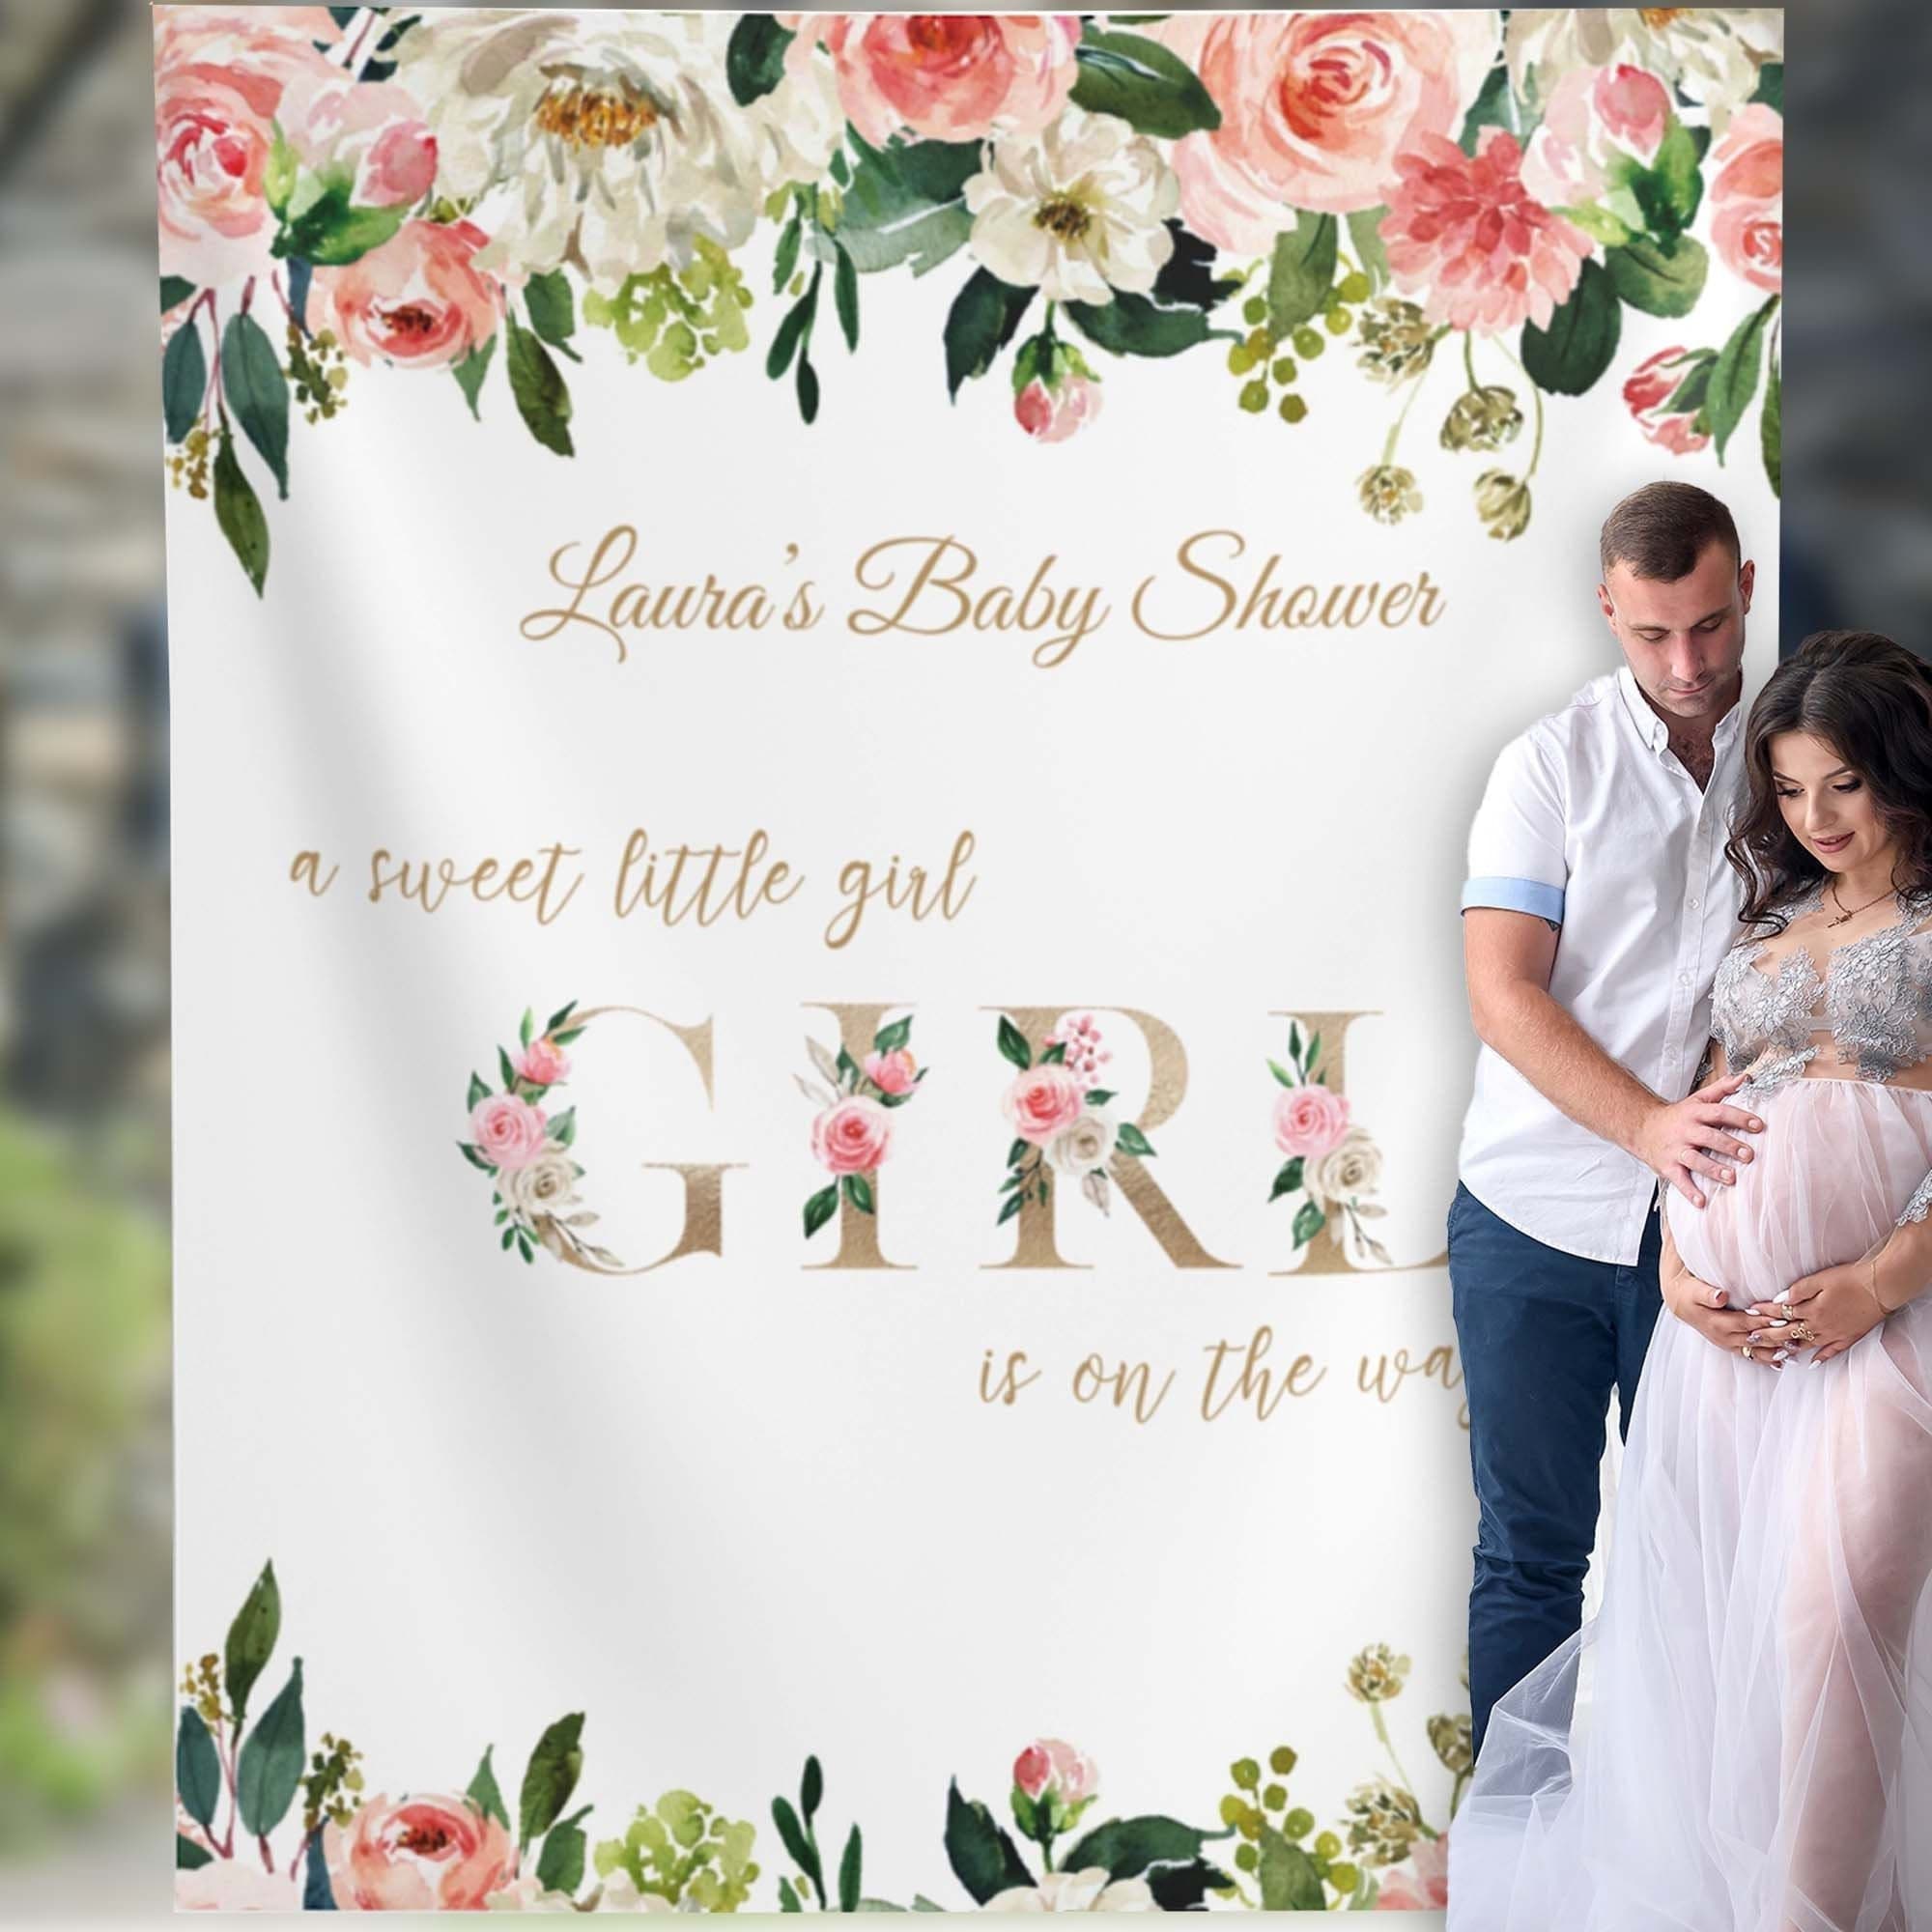 Baby Shower Backdrop for Girls, Floral Backdrop, Blush Pink backdrop, Sweet Baby Girl, Floral Baby Shower Backdrop, Pink and Gold Decor